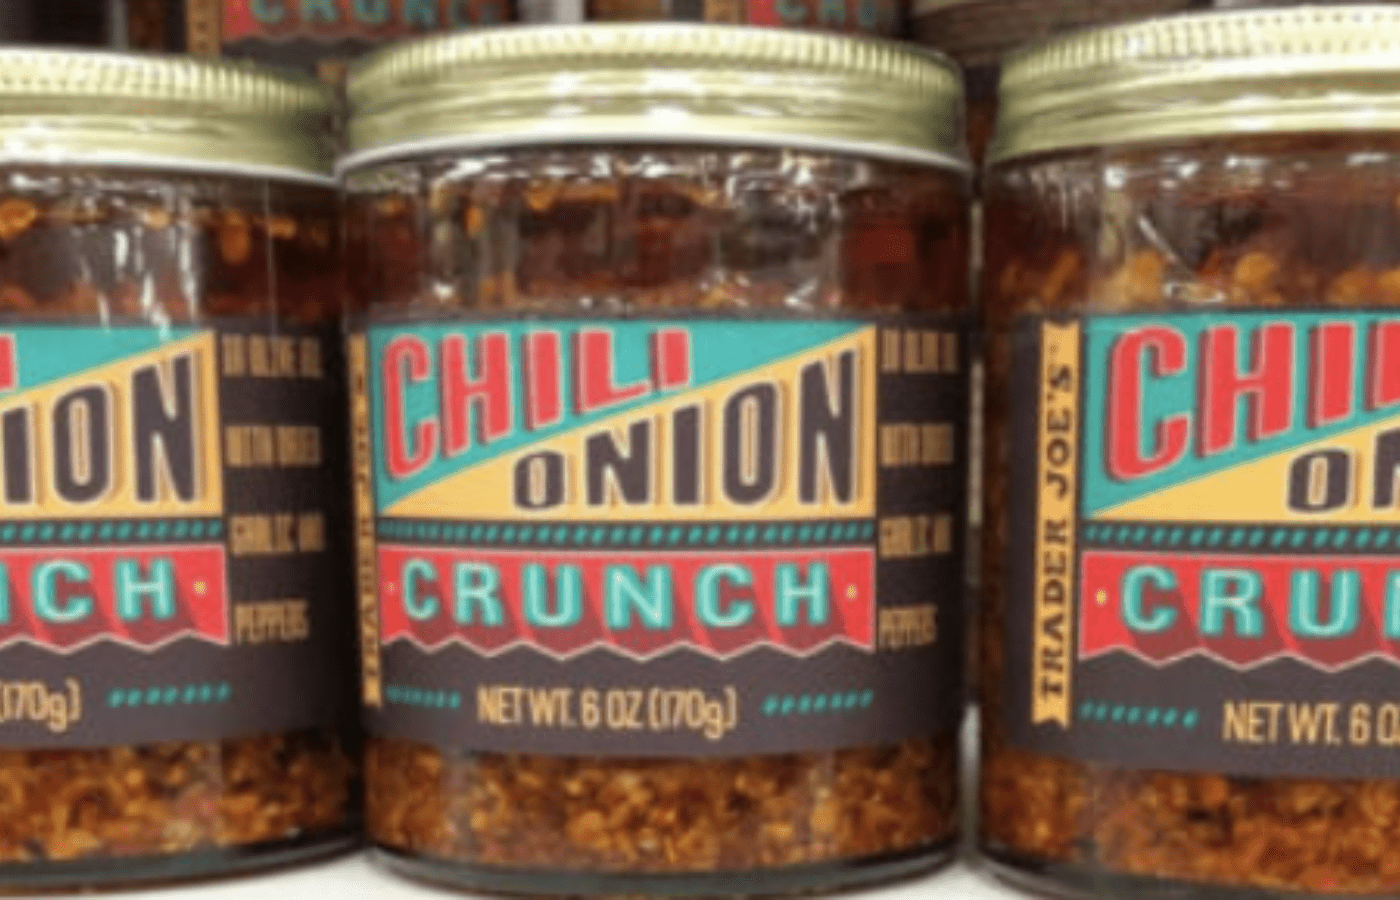 how to store trader joes chili onion crunch